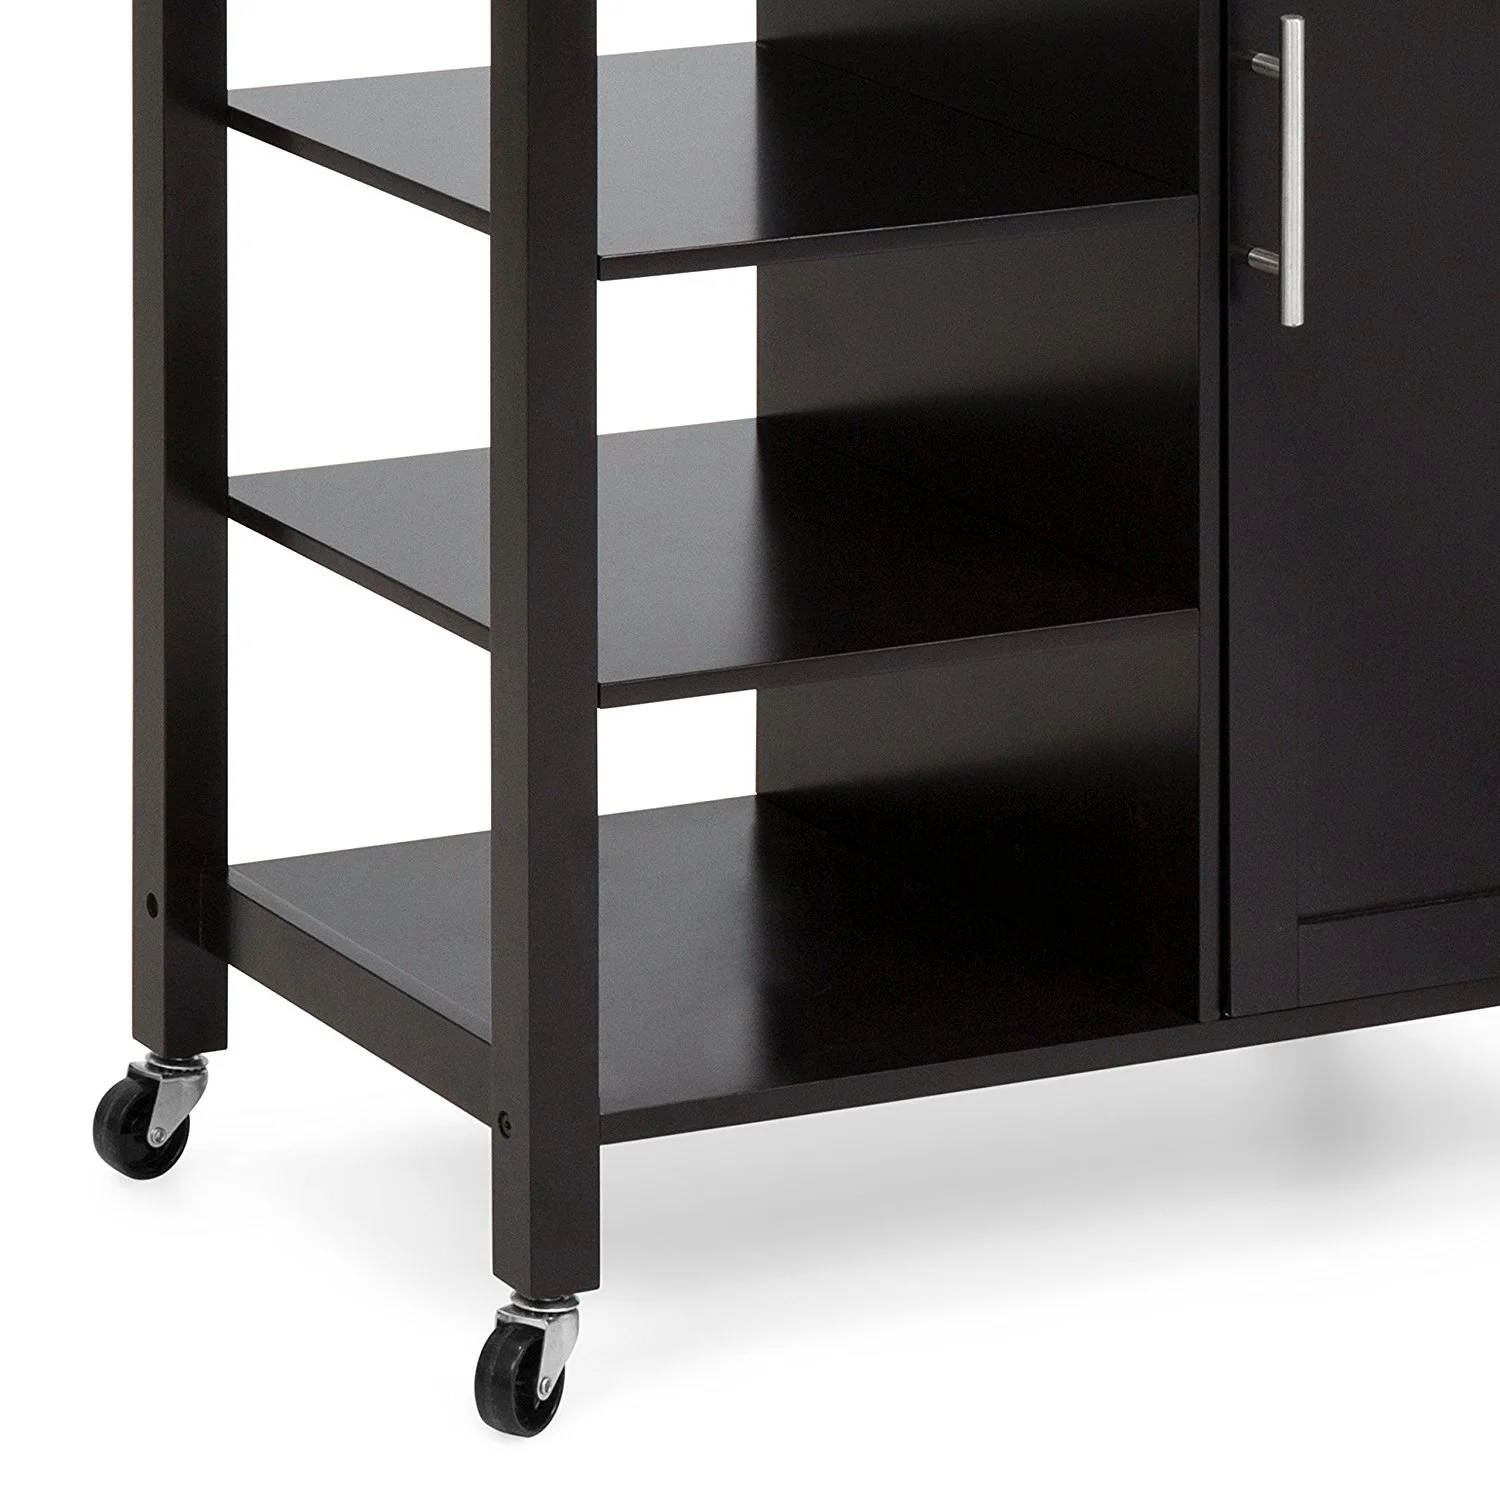 High quality simple multi-layer to move casters service kitchen trolley with drawers